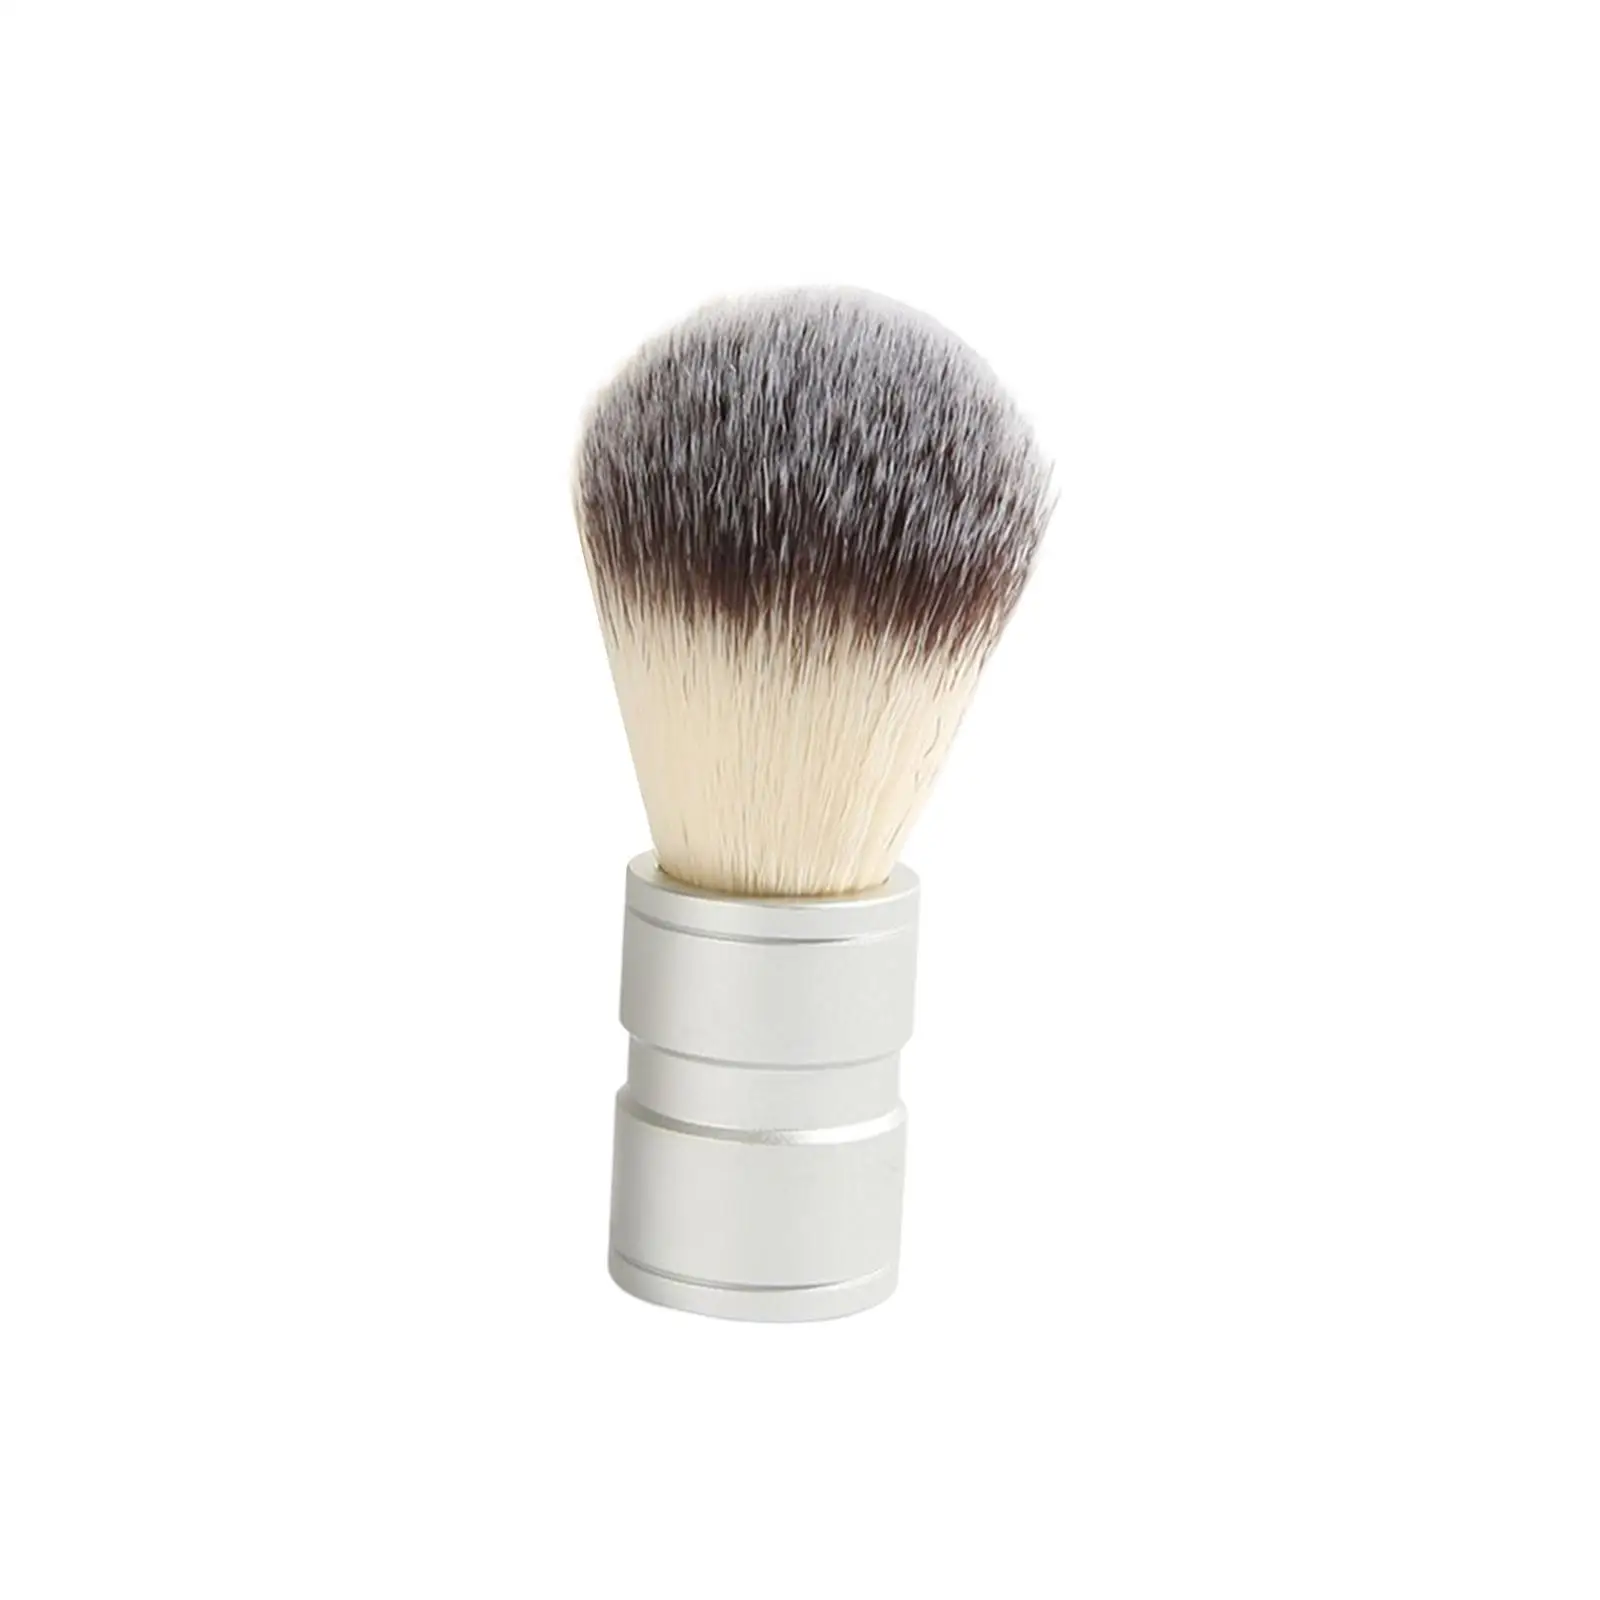 Shaving Brush Male Grooming Soft for Home Father Fathers Day Gift